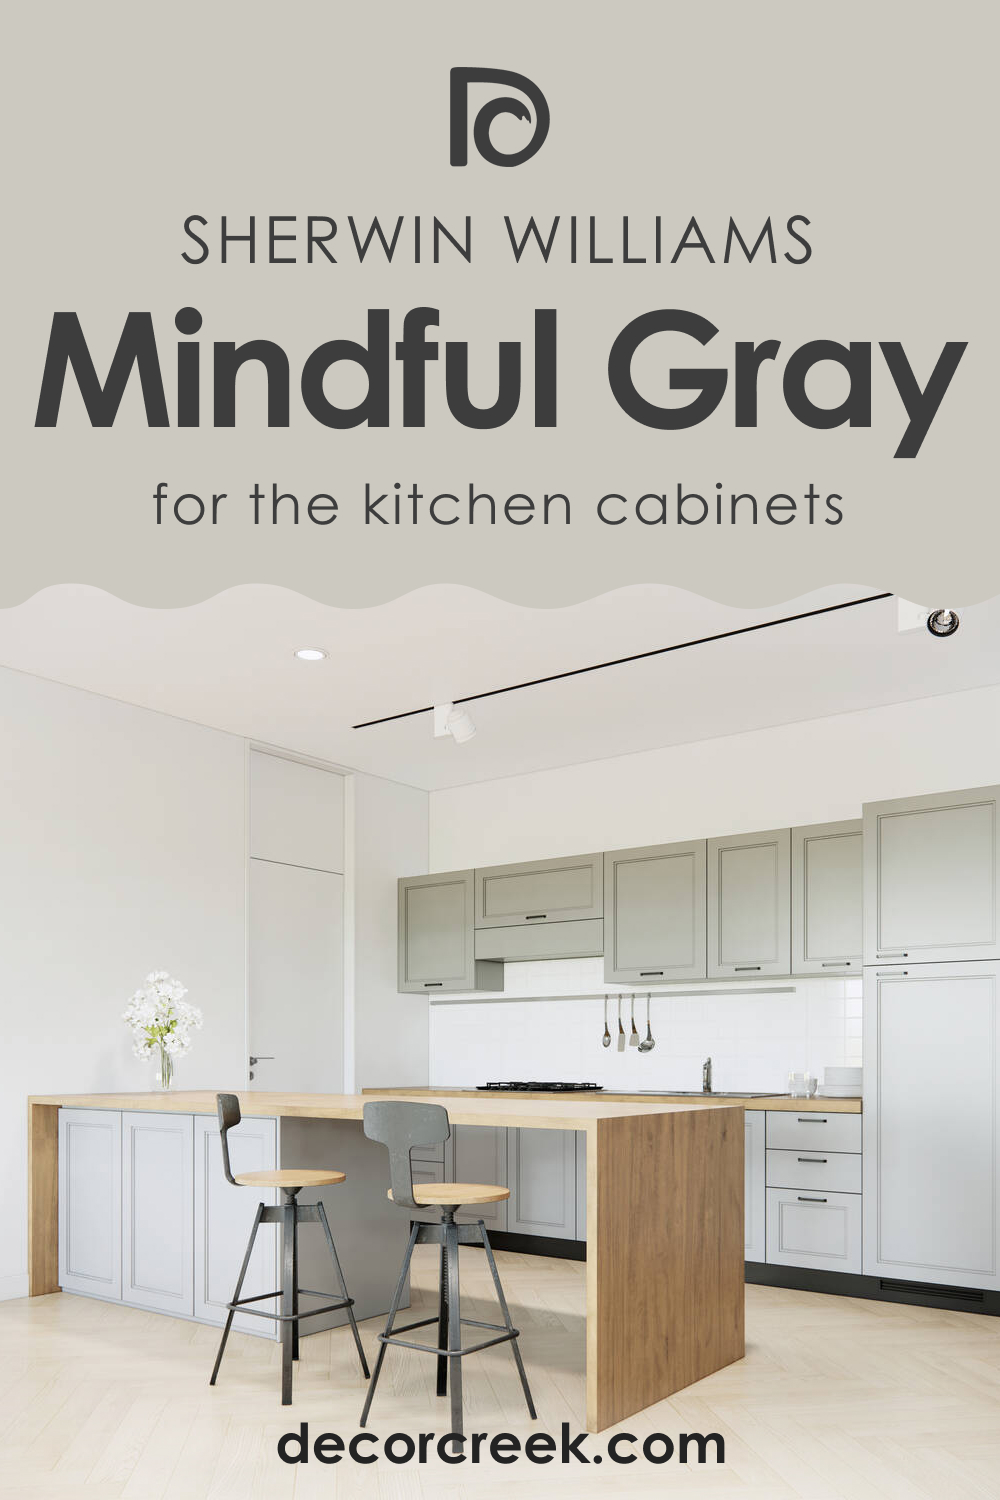 How to Use SW 7016 Mindful Gray for Kitchen Cabinets?